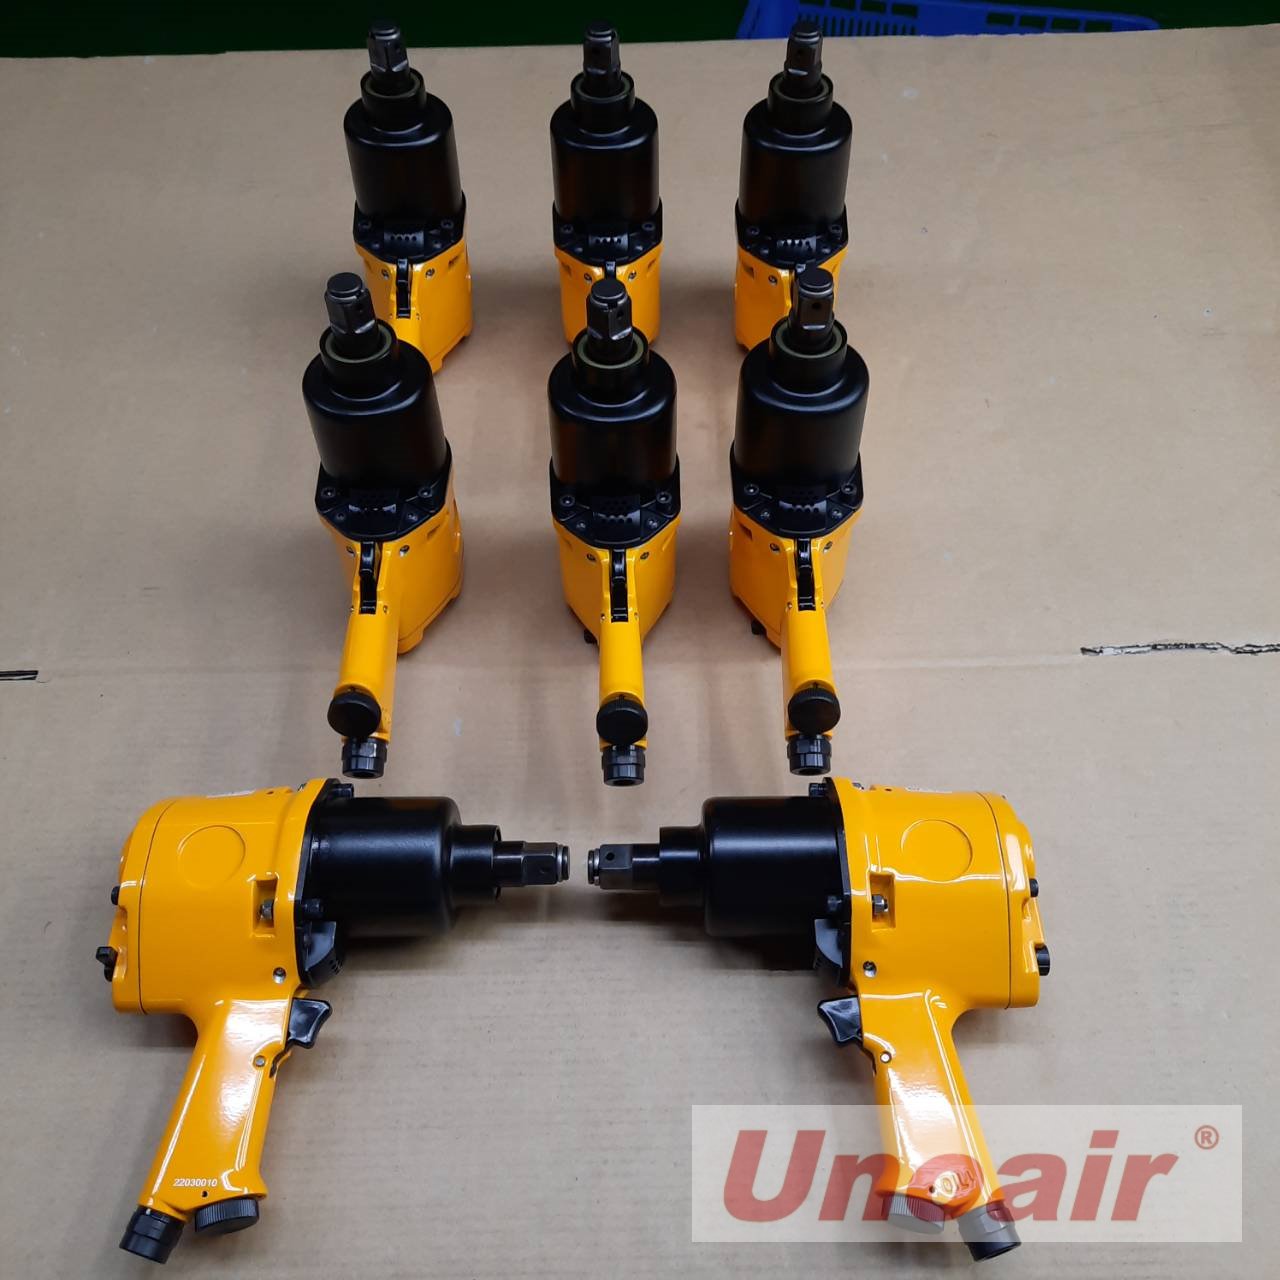 UNOAIR Weekly Update 05/27/2022 WE HAVE A LARGE SELECTION OF HANDTOOLS AND POWERTOOLS